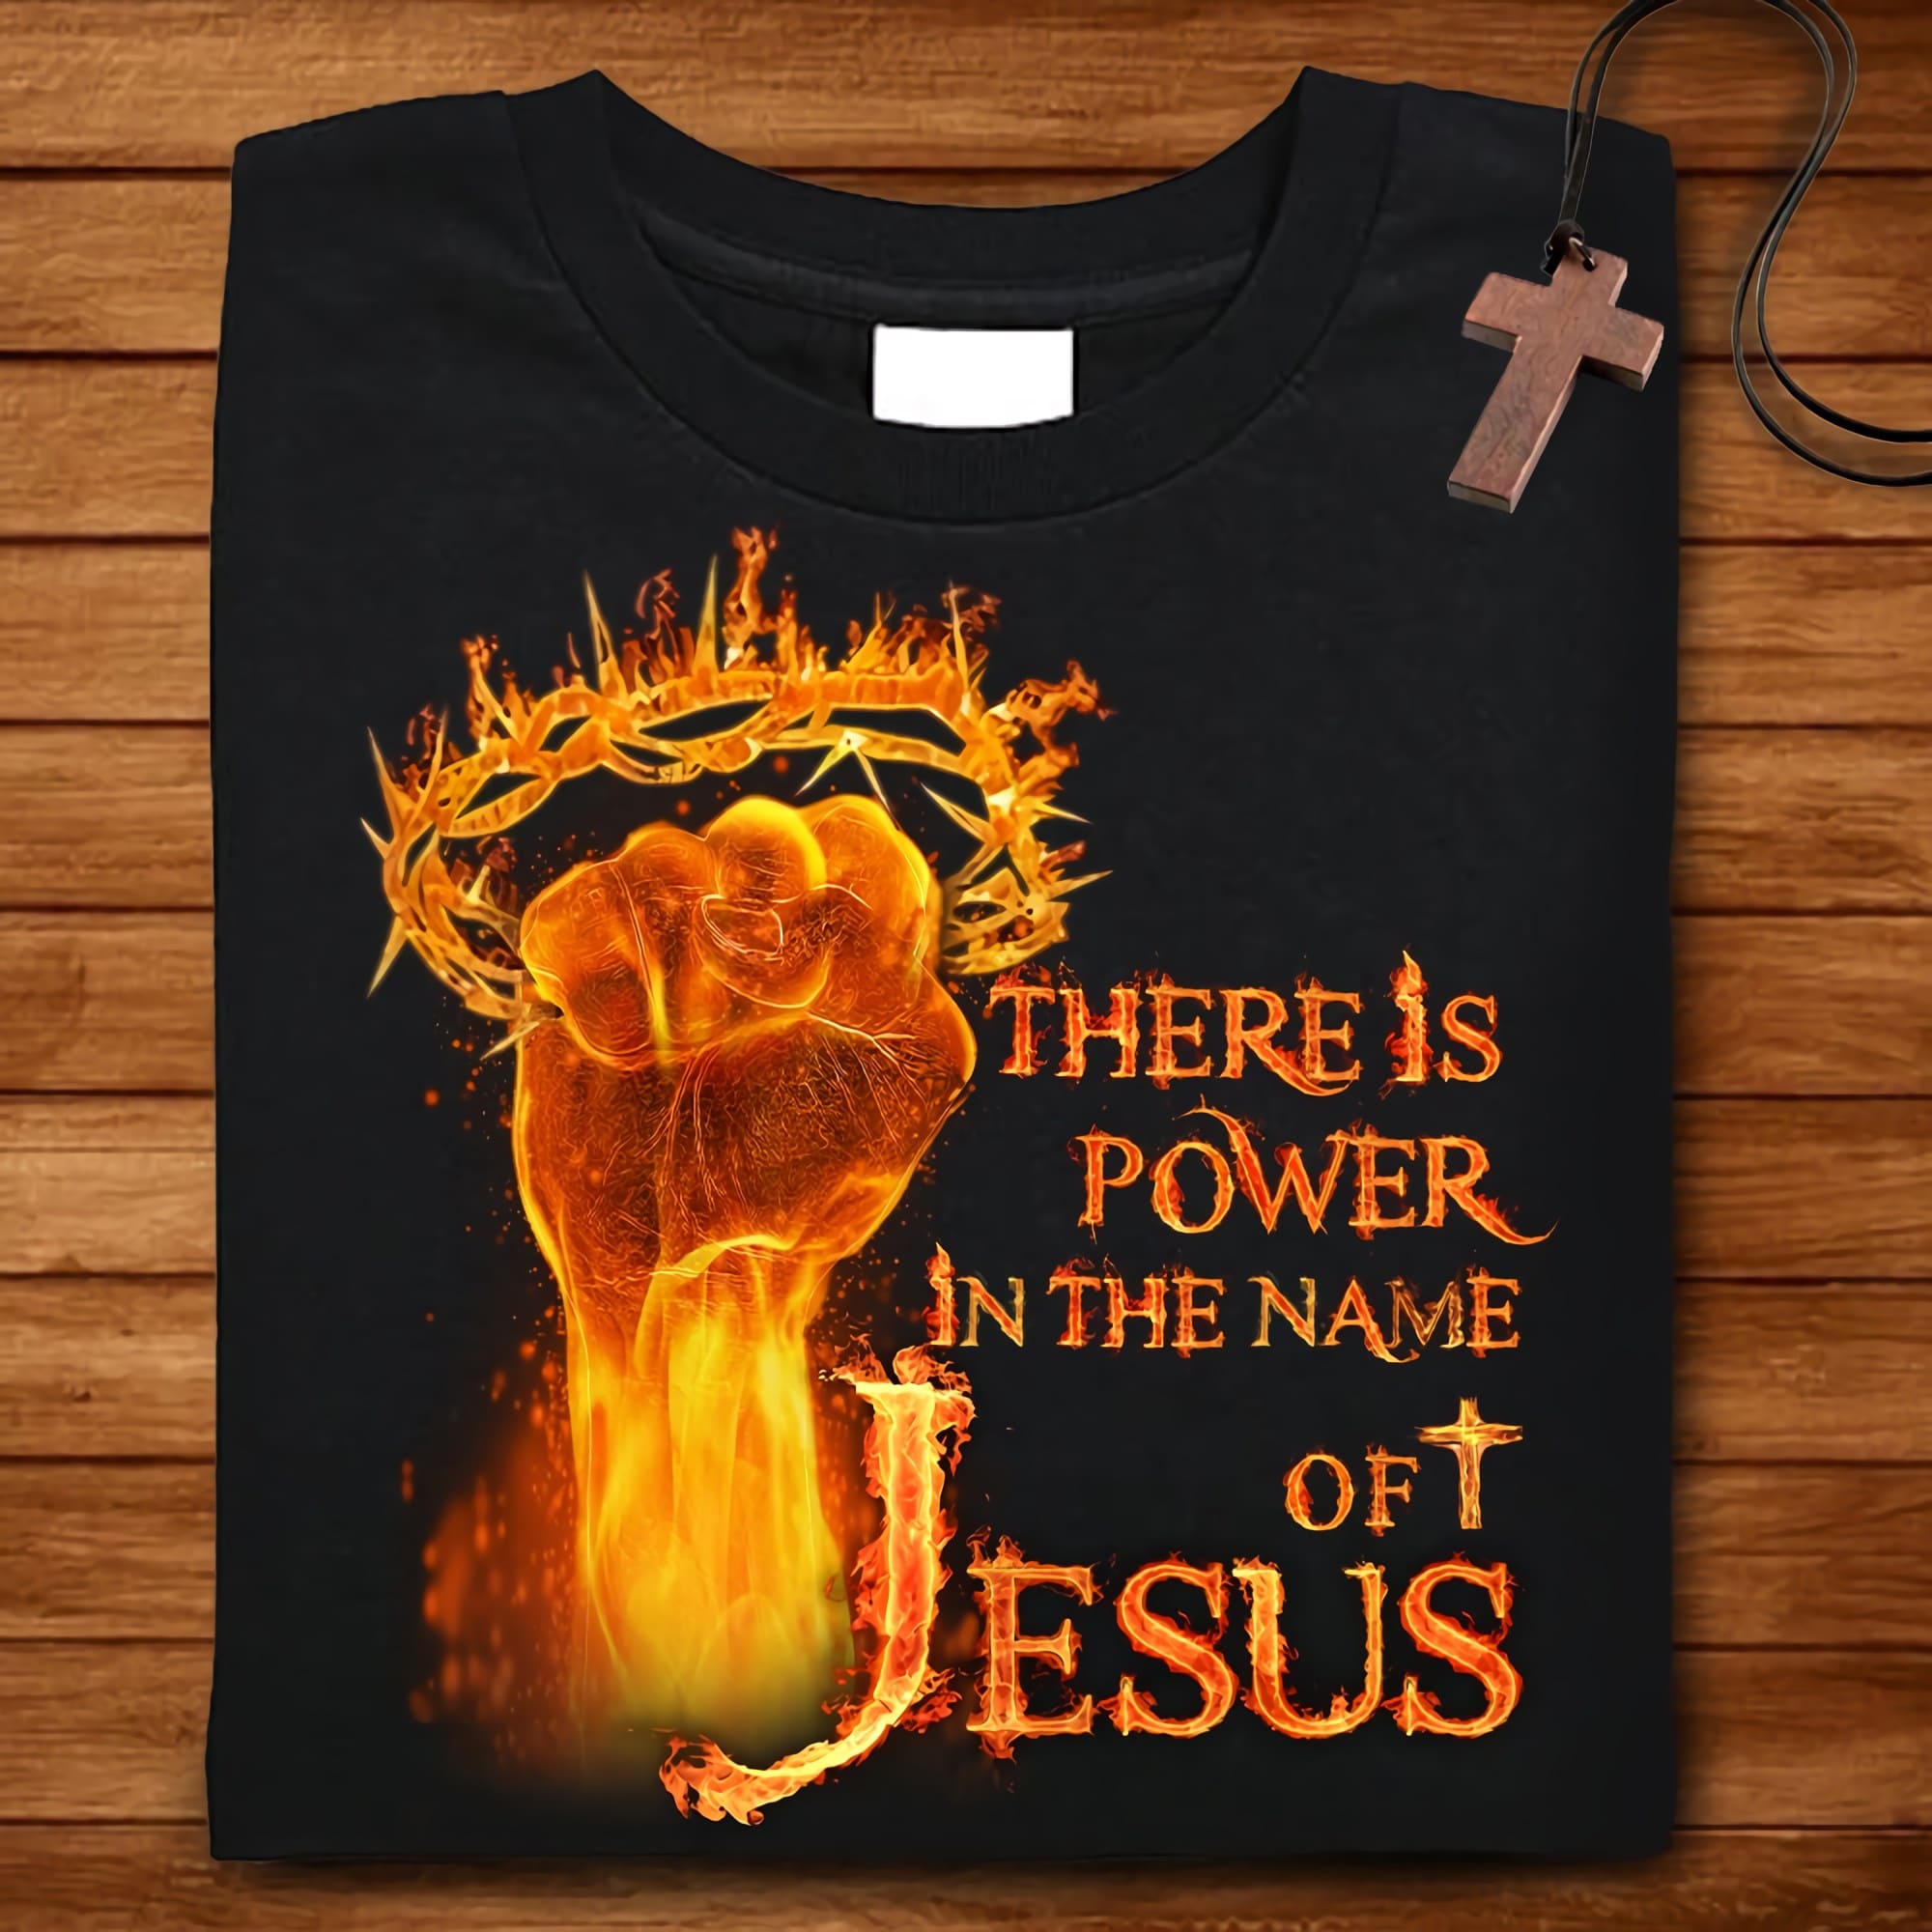 There is power in the name of Jesus - Believe in Jesus, Crown of thorns